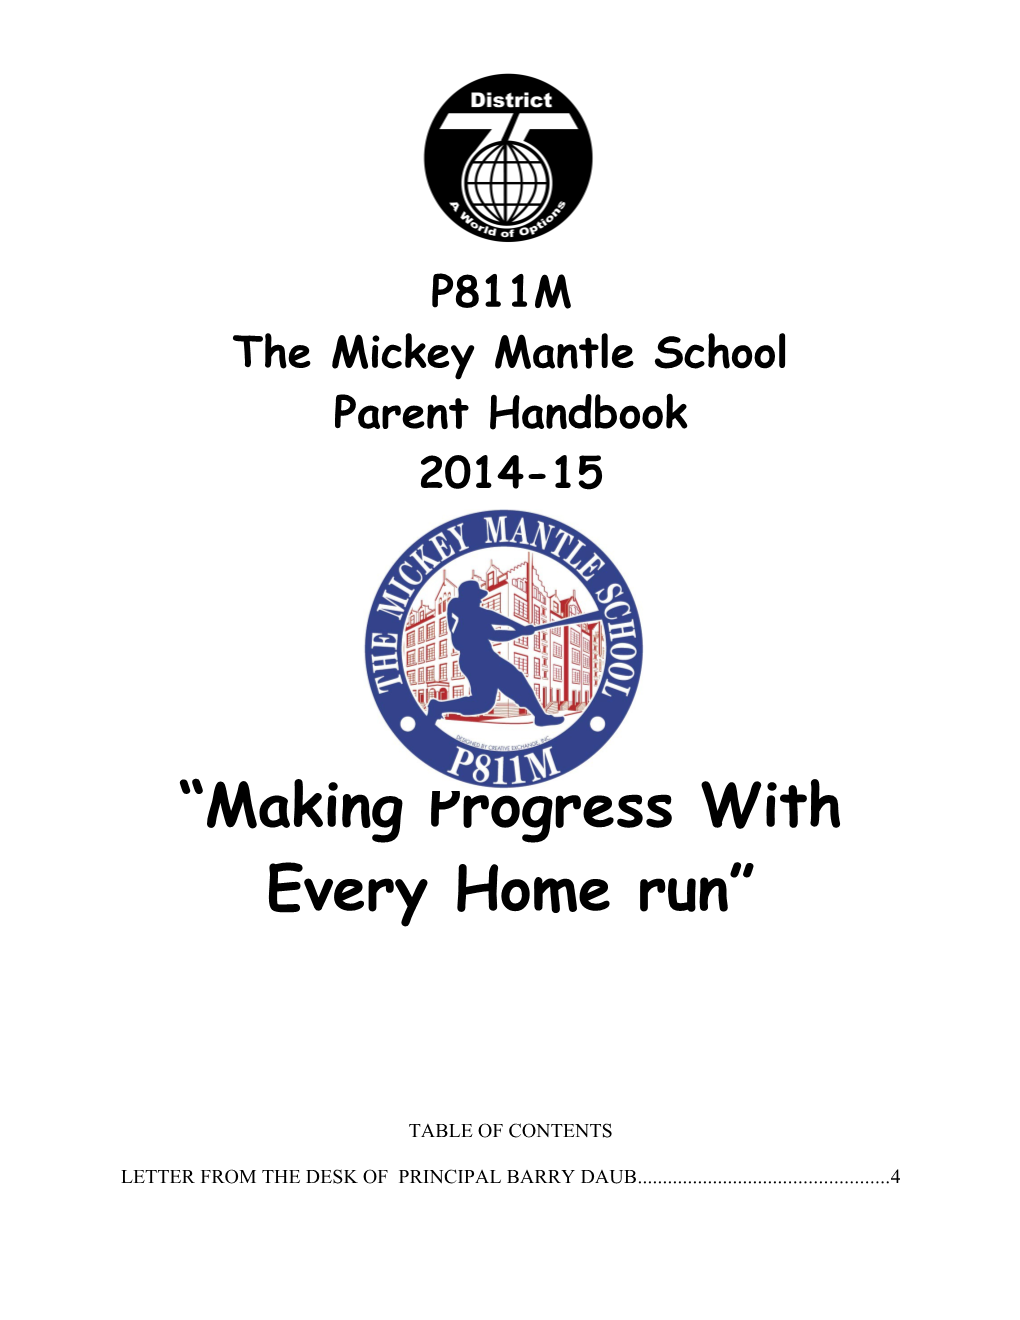 The Mickey Mantle School